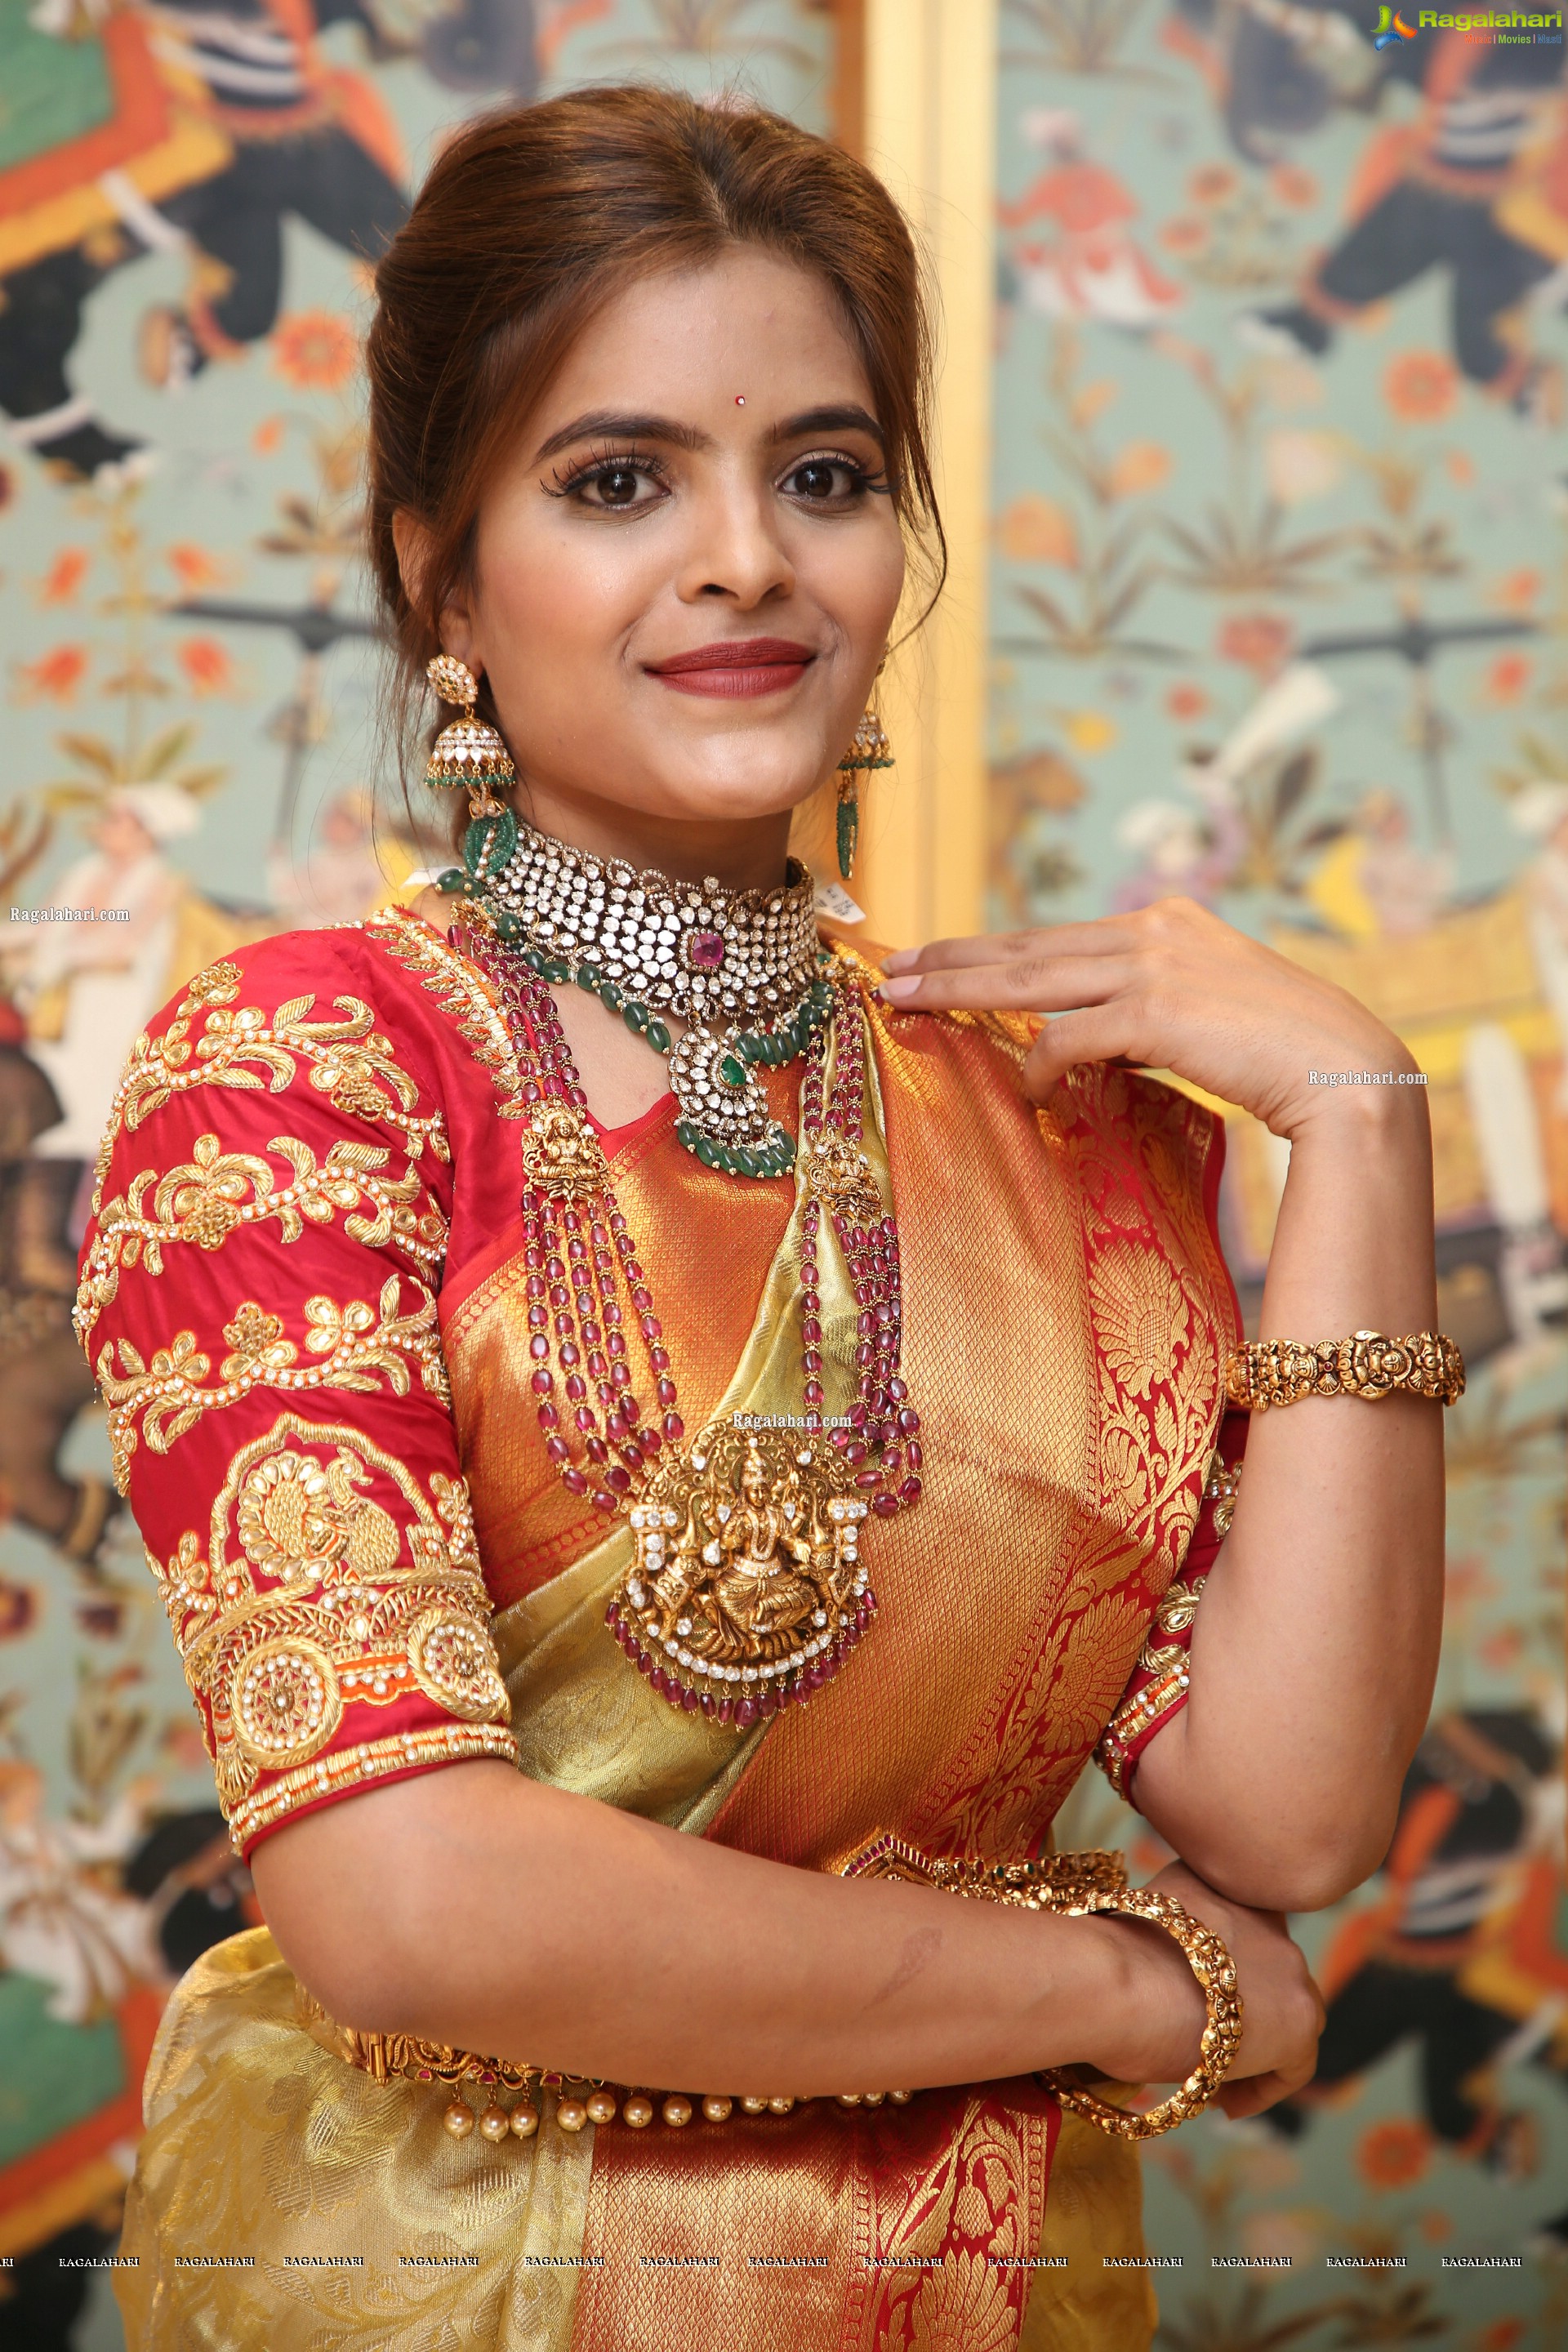 Kusumm Poses With Gold Jewellery, HD Photo Gallery